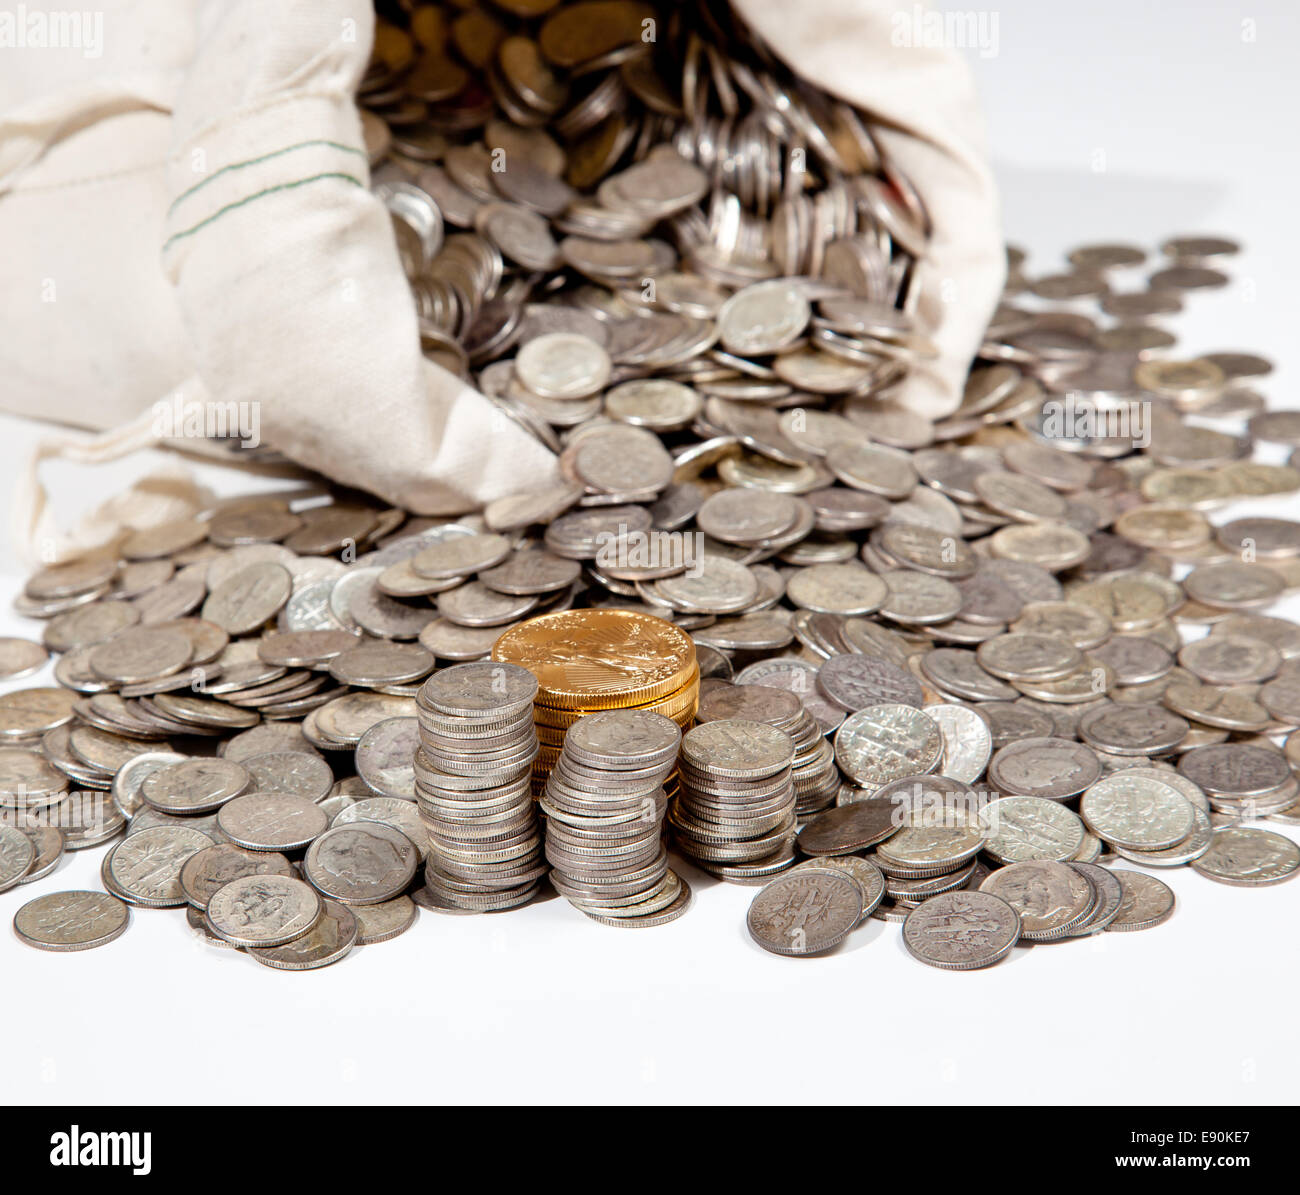 Bag of silver and gold coins Stock Photo